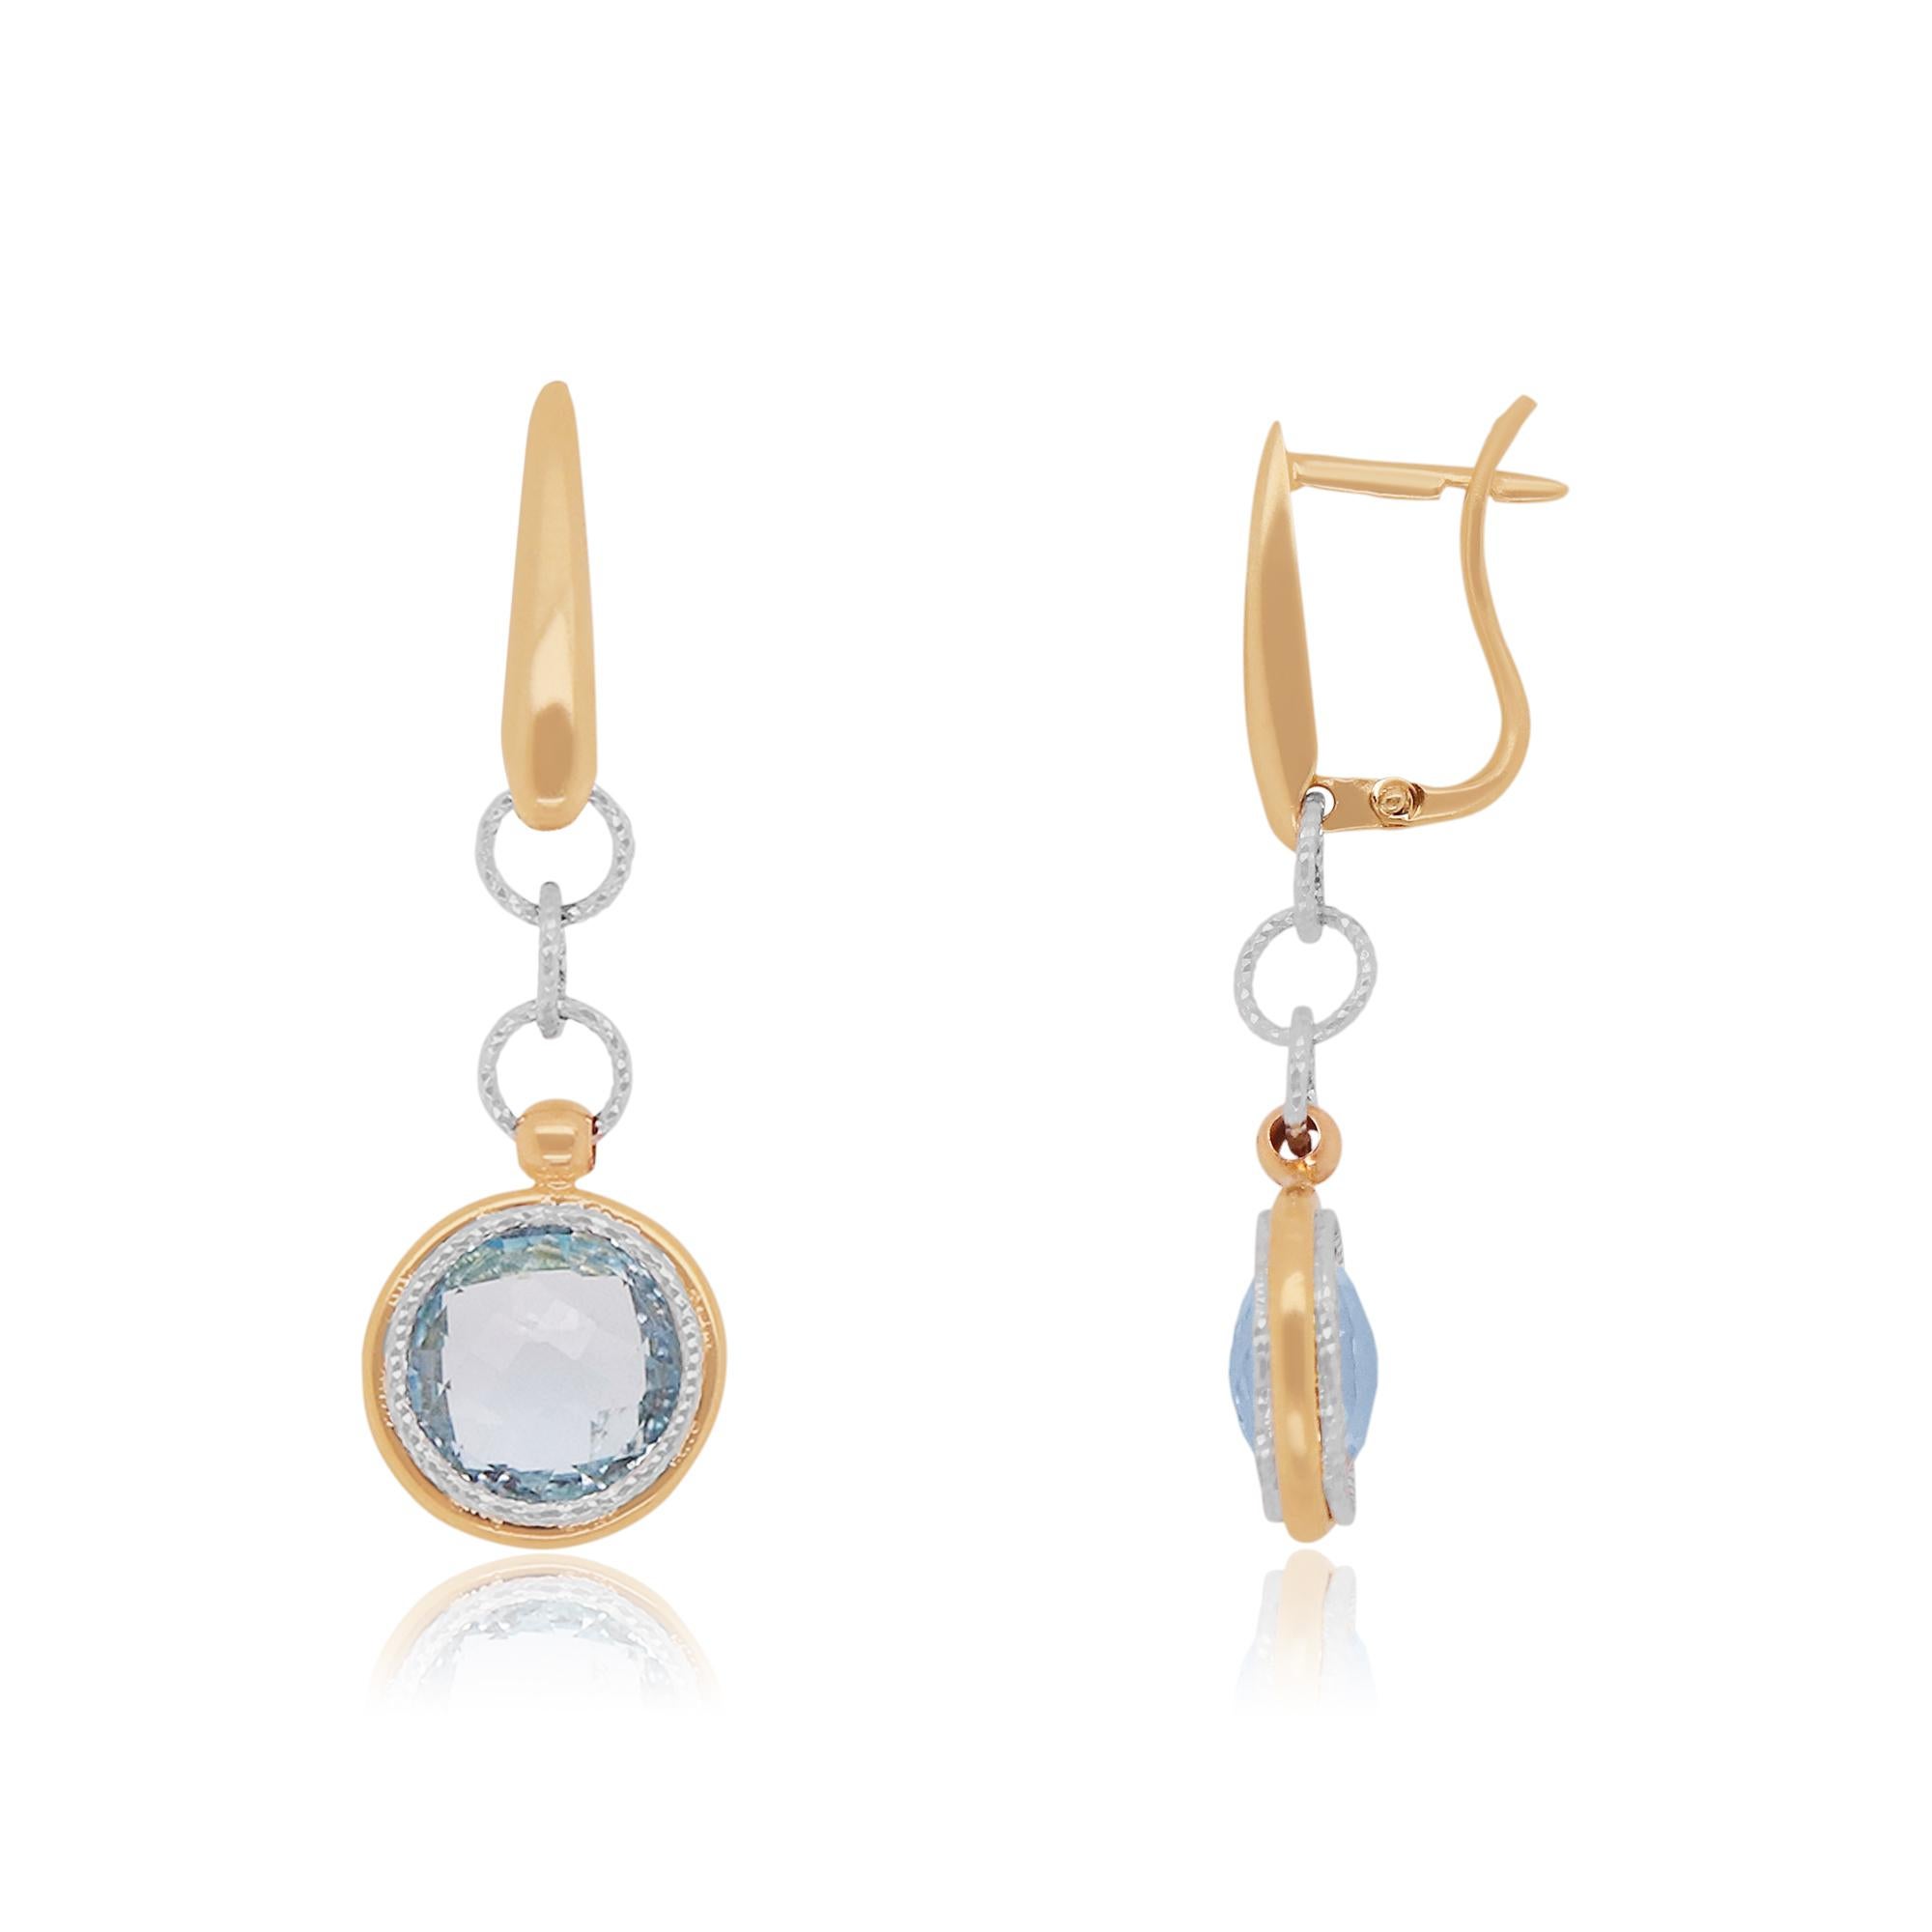 Material: 14k Yellow Gold 
Stone Details: 2 Round Shaped Blue Topaz Stones 

Fine one-of-a-kind craftsmanship meets incredible quality in this breathtaking piece of jewelry.

All Alberto pieces are made in the U.S.A. and come with a lifetime